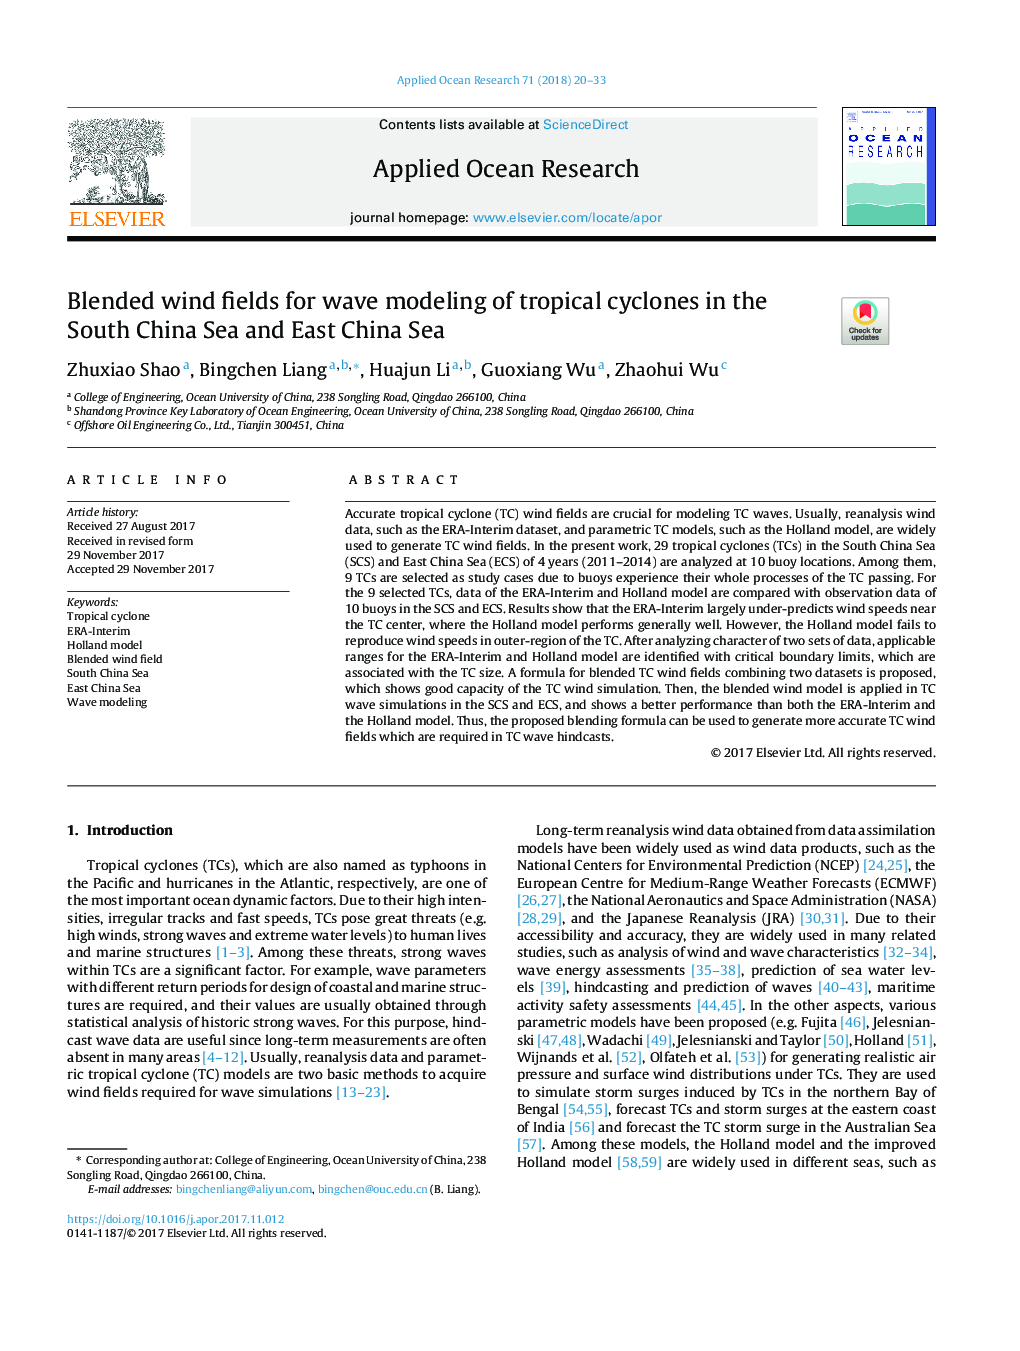 Blended wind fields for wave modeling of tropical cyclones in the South China Sea and East China Sea